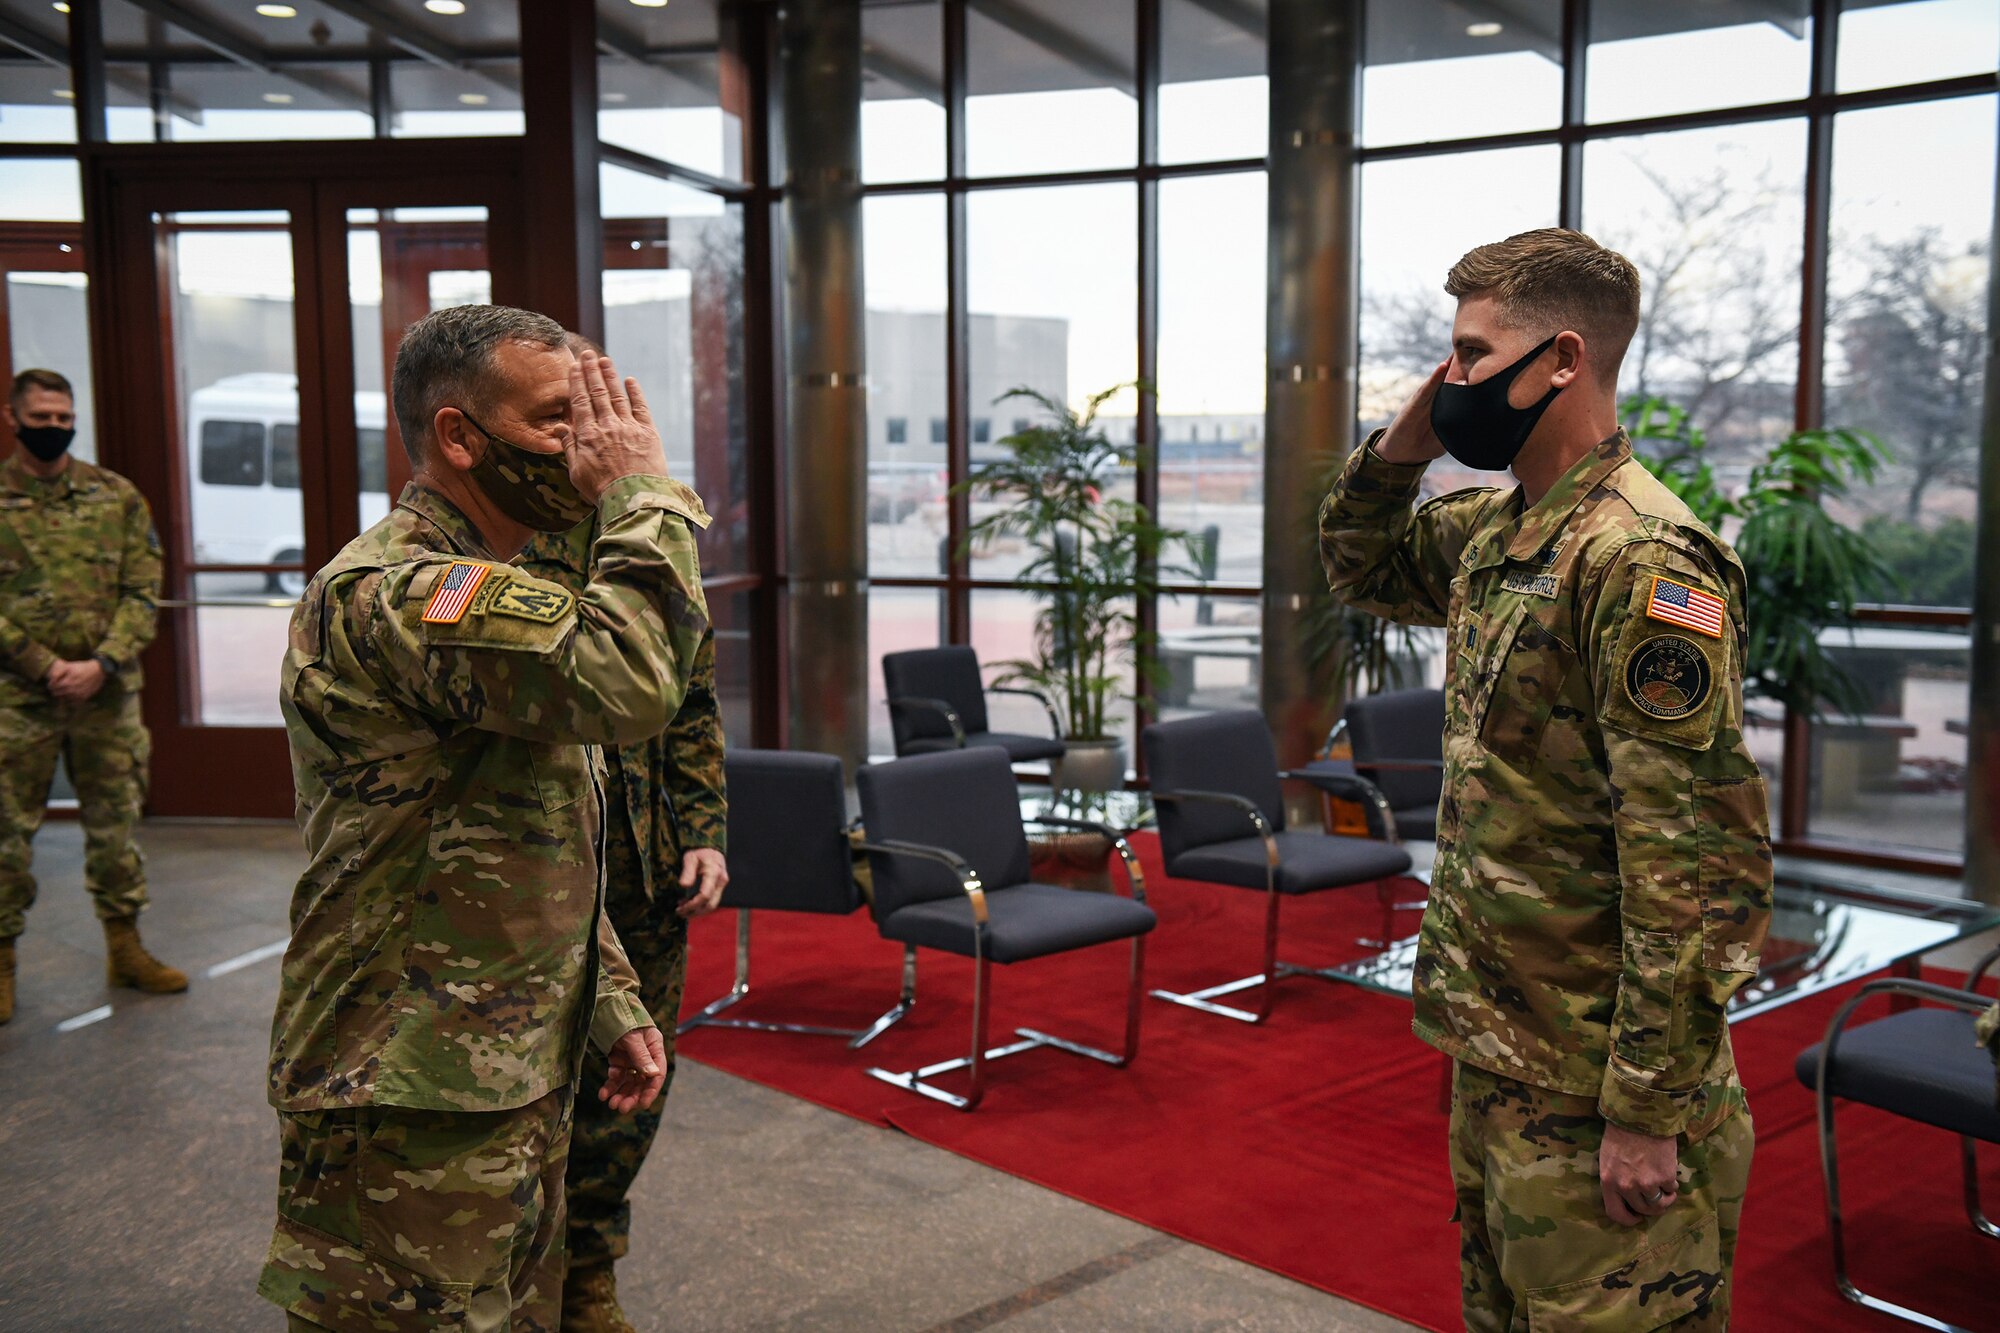 U.S. Army Gen. James Dickinson, left, U.S. Space Command commander, returns the salute of U.S. Space Force Capt. Peter Spittler, a 2nd Space Warning Squadron flight commander, after coining Spittler in the Mission Control Station lobby on Buckley Air Force Base, Colo., Jan 7, 2021.